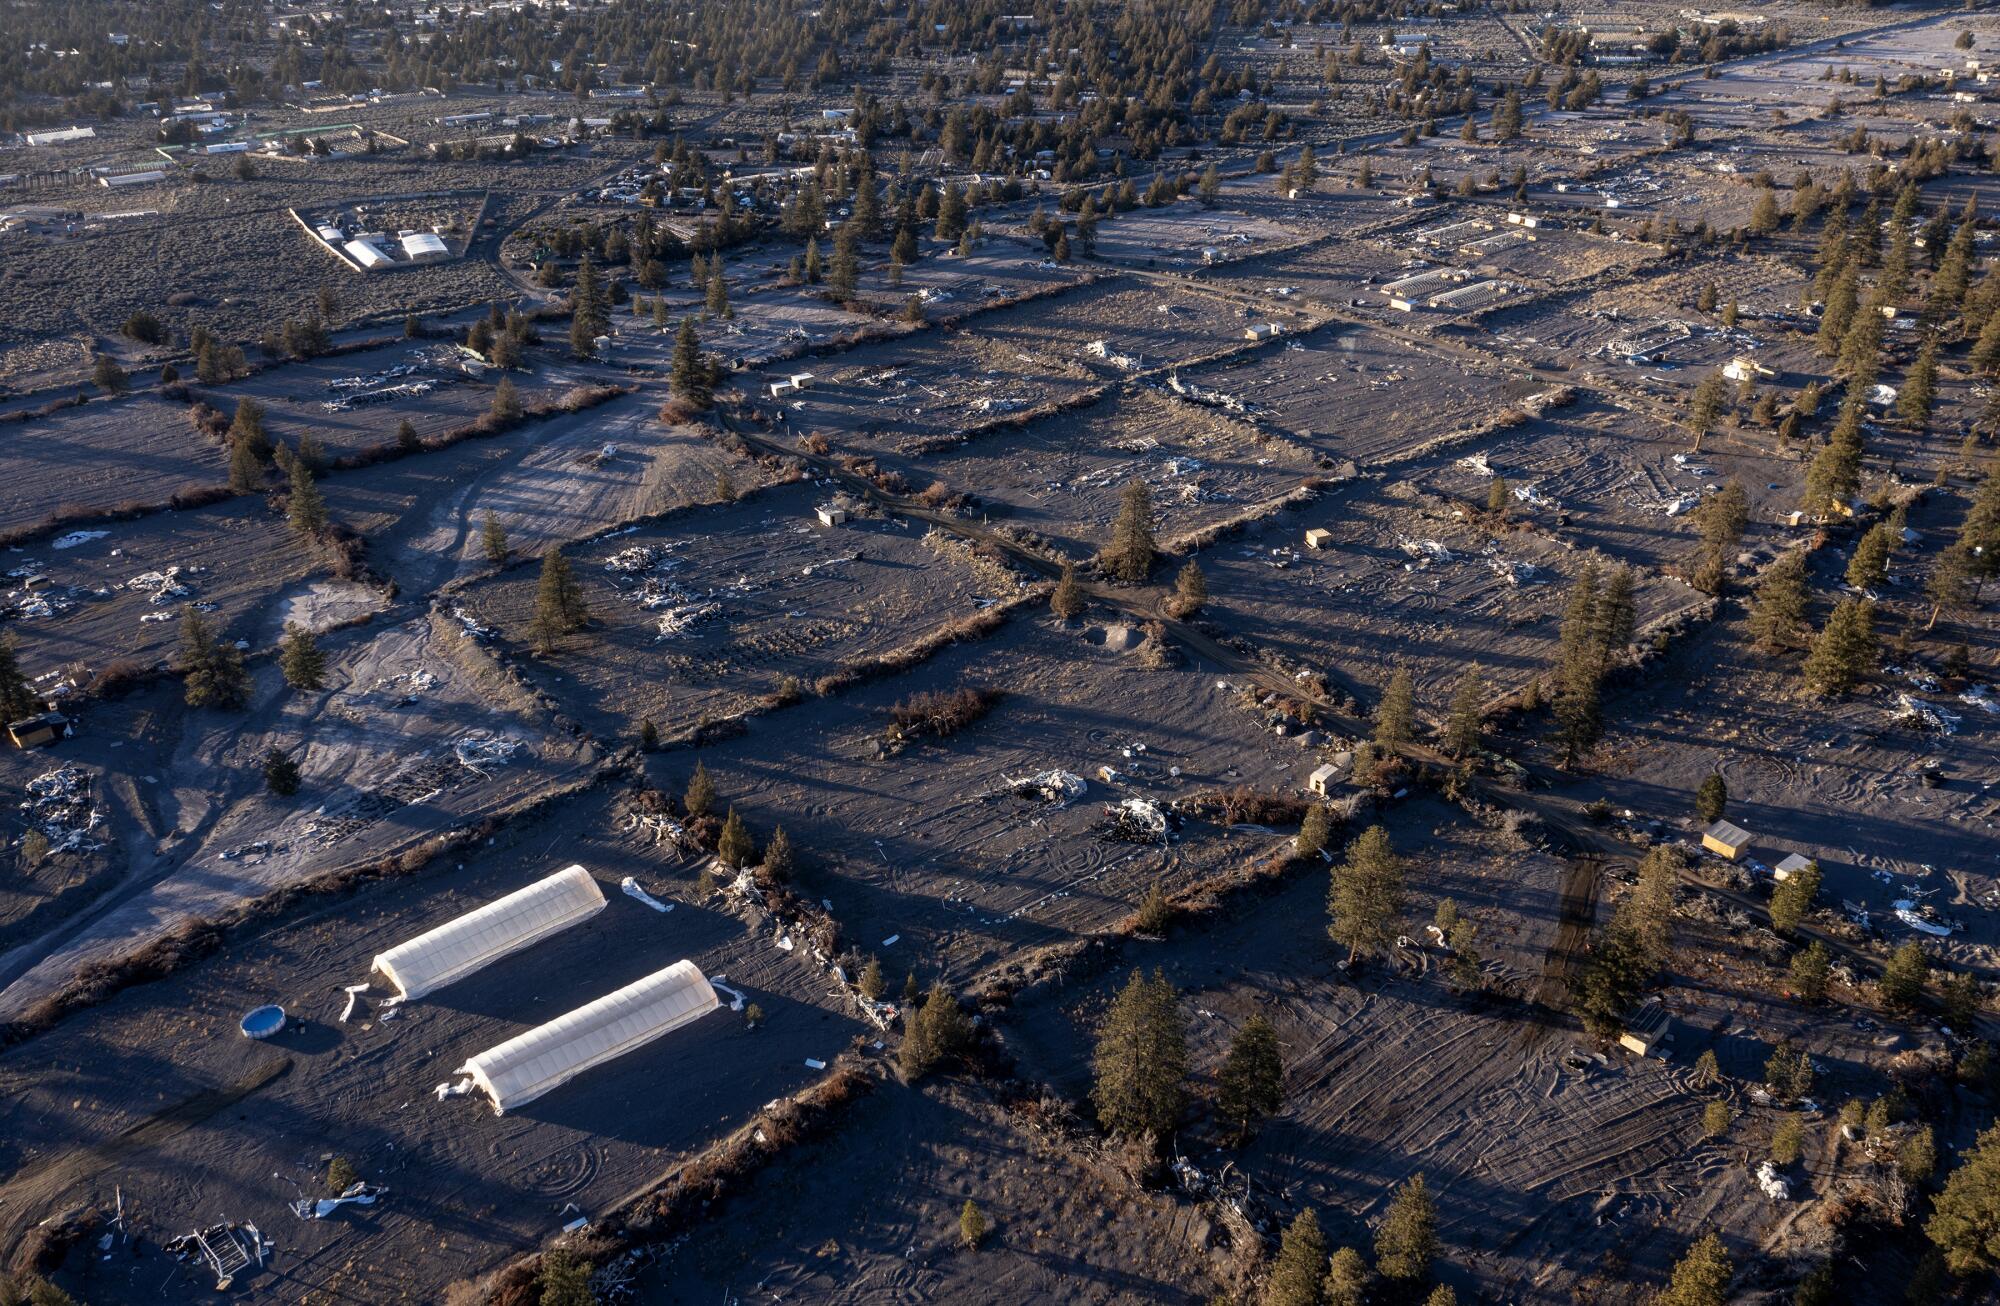 Aerial view of greenhouses illegally growing cannabis in Siskiyou County.